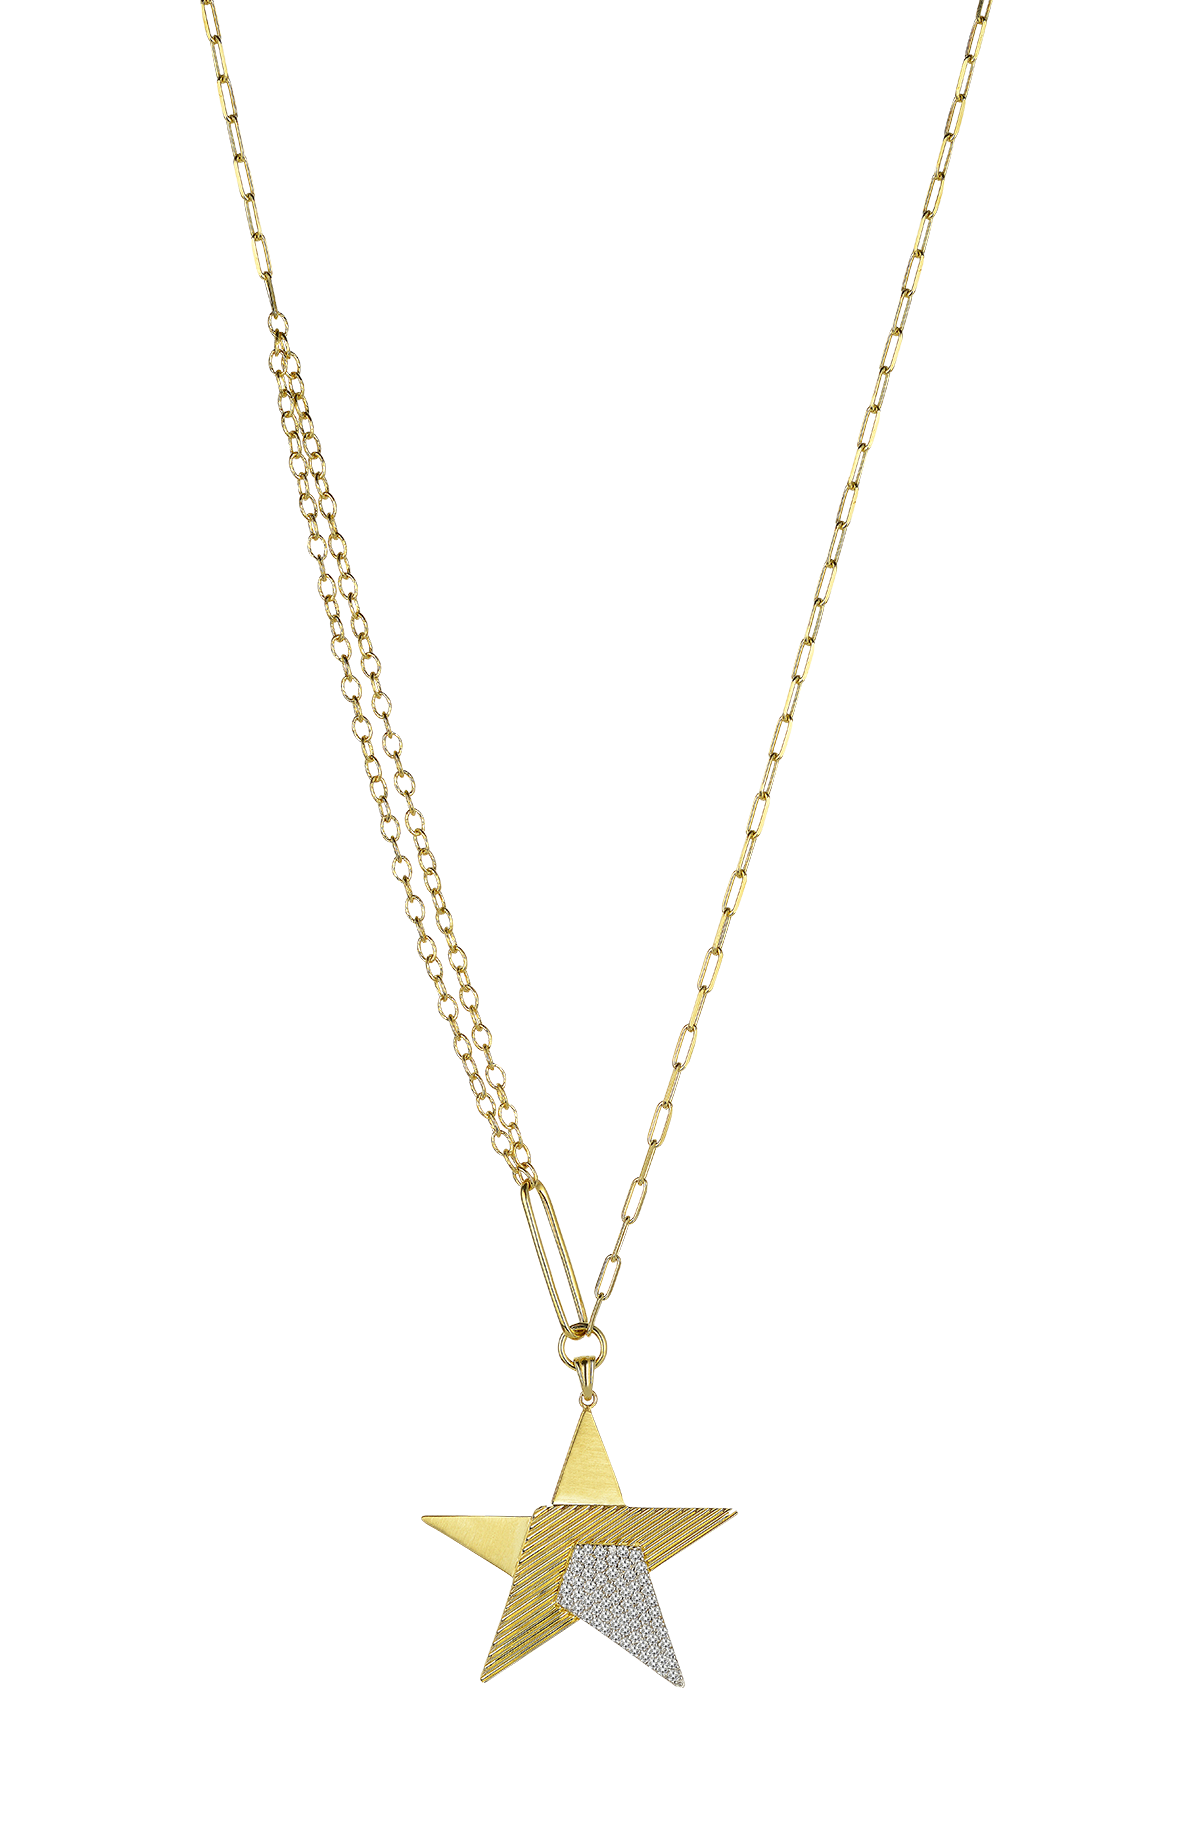 Galactic Necklace Star in Yellow Gold - Her Story Shop